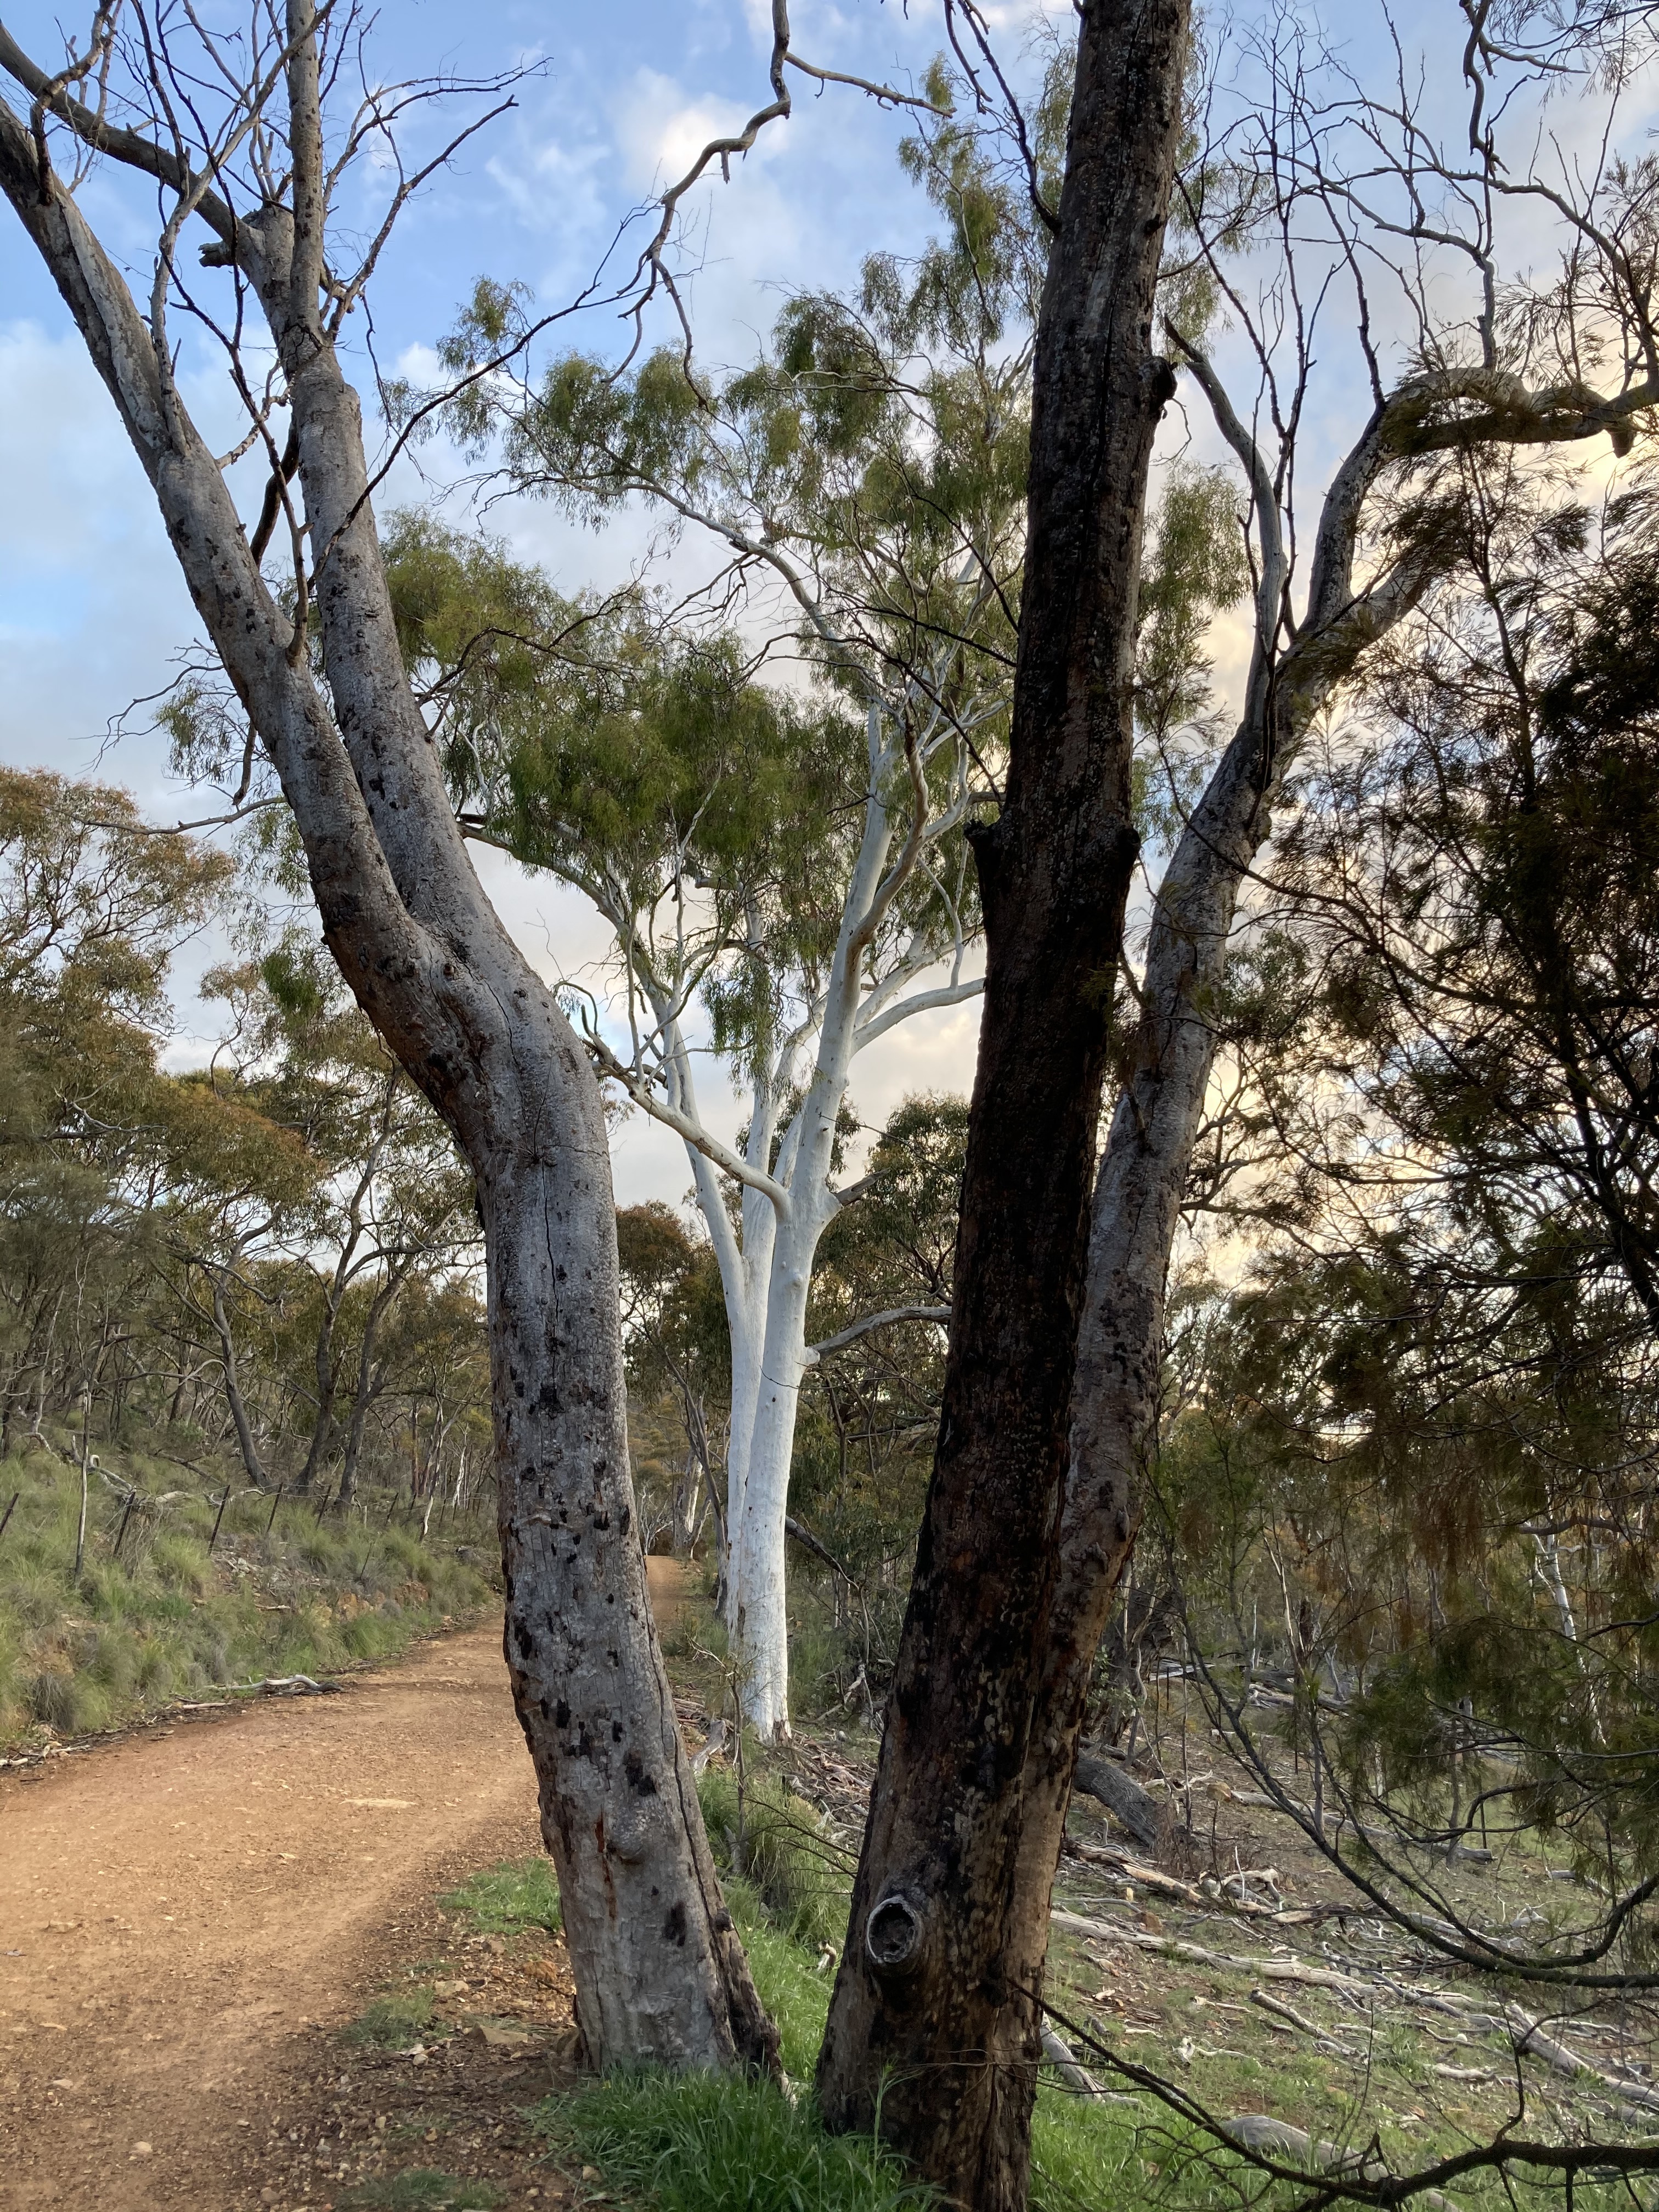 Two trees, in the fork of a tree, with a trail running past